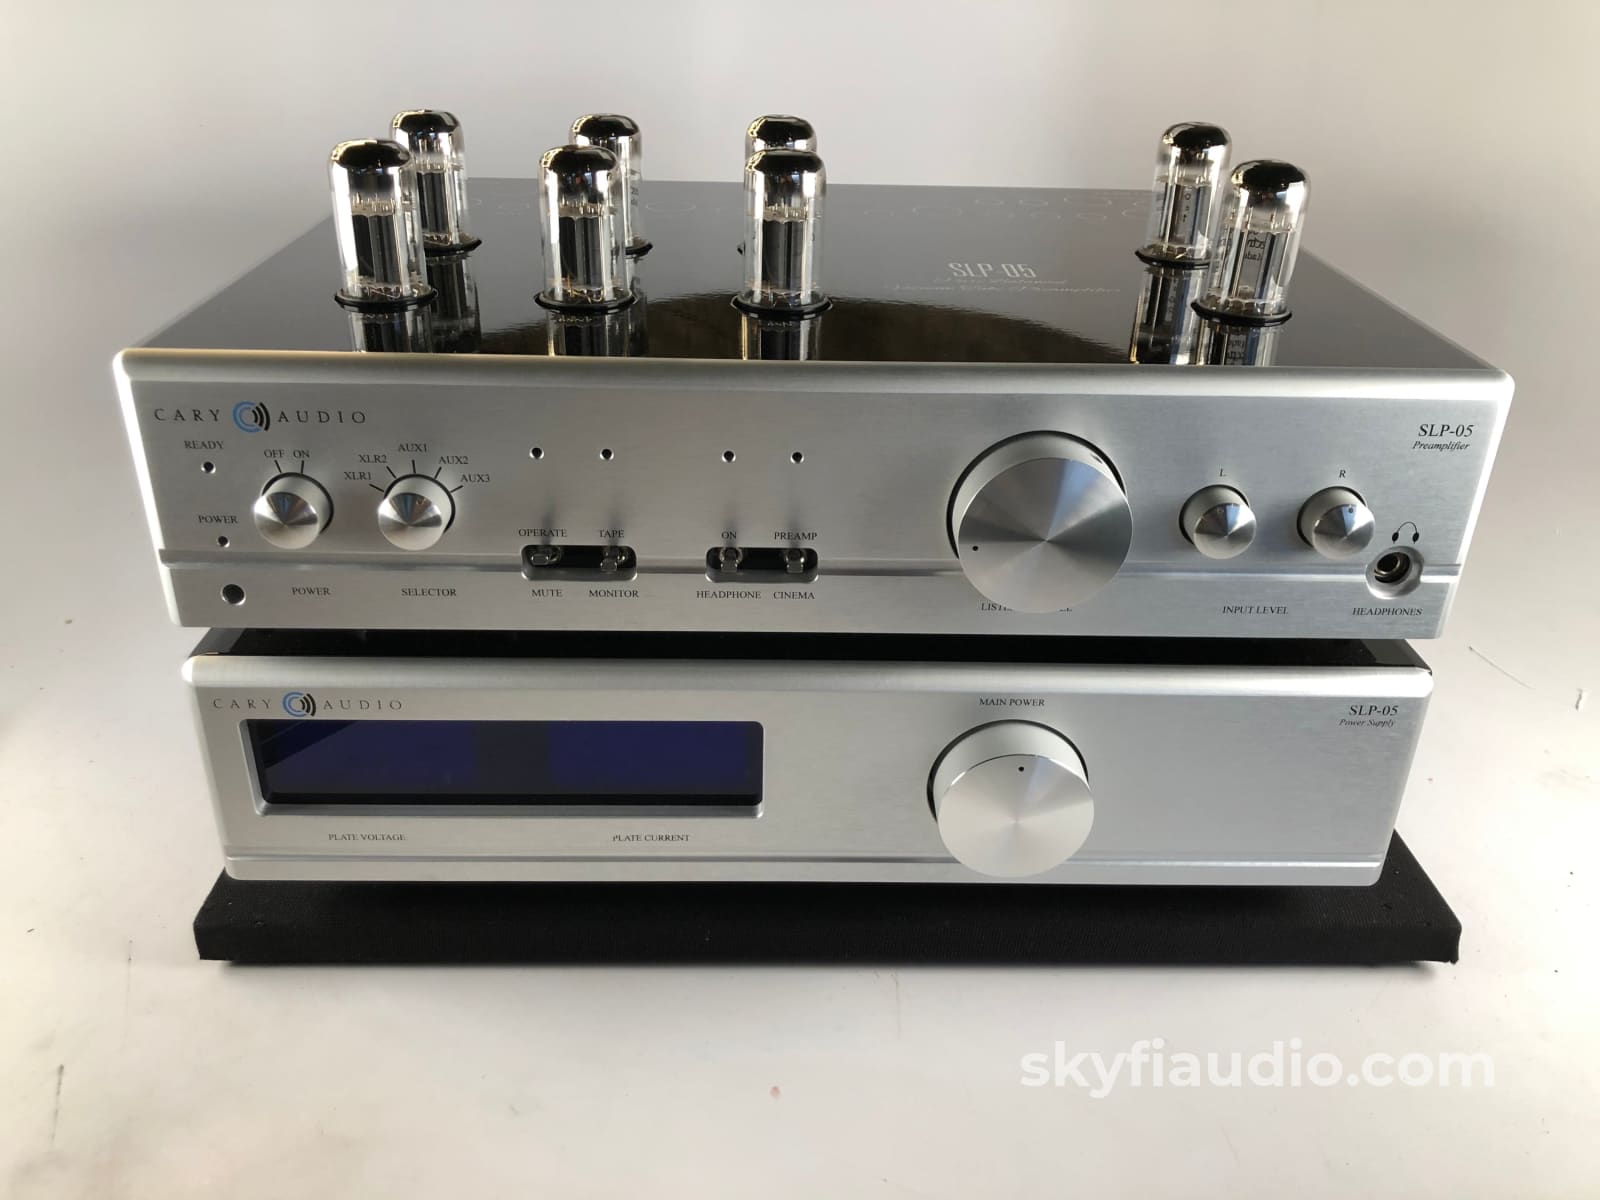 Cary Audio Slp-05 Two Chassis Tube Preamp - Complete And Mint Preamplifier